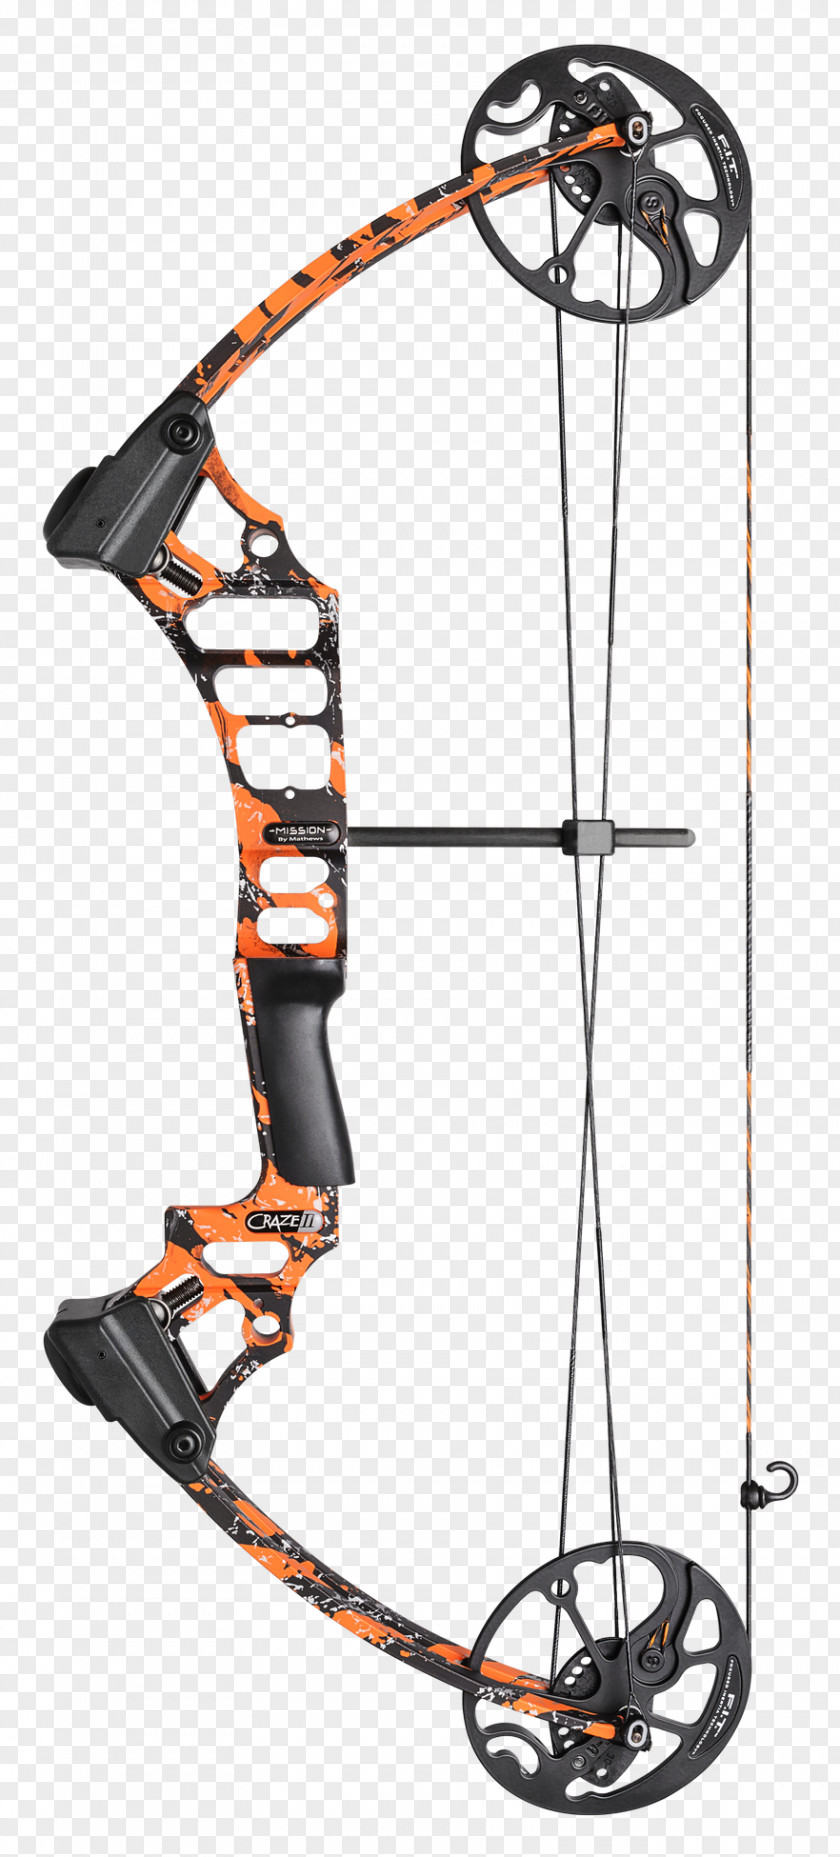 Compound Bows Archery Bowhunting Bow And Arrow PNG